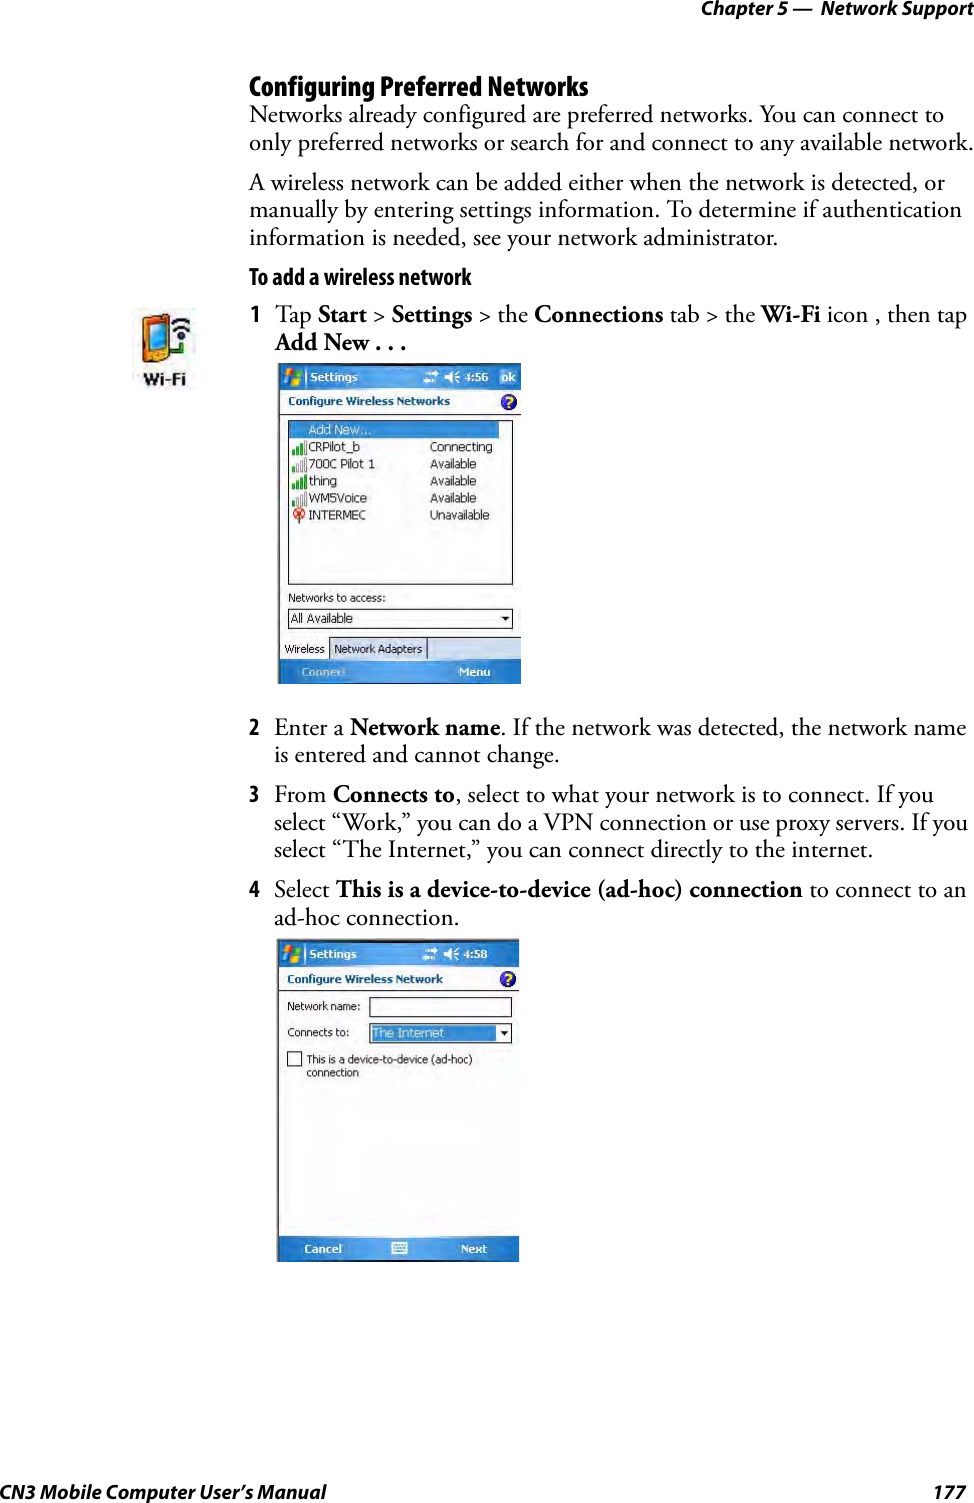 Chapter 5 —  Network SupportCN3 Mobile Computer User’s Manual 177Configuring Preferred NetworksNetworks already configured are preferred networks. You can connect to only preferred networks or search for and connect to any available network.A wireless network can be added either when the network is detected, or manually by entering settings information. To determine if authentication information is needed, see your network administrator.To add a wireless network2Enter a Network name. If the network was detected, the network name is entered and cannot change.3From Connects to, select to what your network is to connect. If you select “Work,” you can do a VPN connection or use proxy servers. If you select “The Internet,” you can connect directly to the internet.4Select This is a device-to-device (ad-hoc) connection to connect to an ad-hoc connection.1Tap Start &gt; Settings &gt; the Connections tab &gt; the Wi-Fi icon , then tap Add New . . .